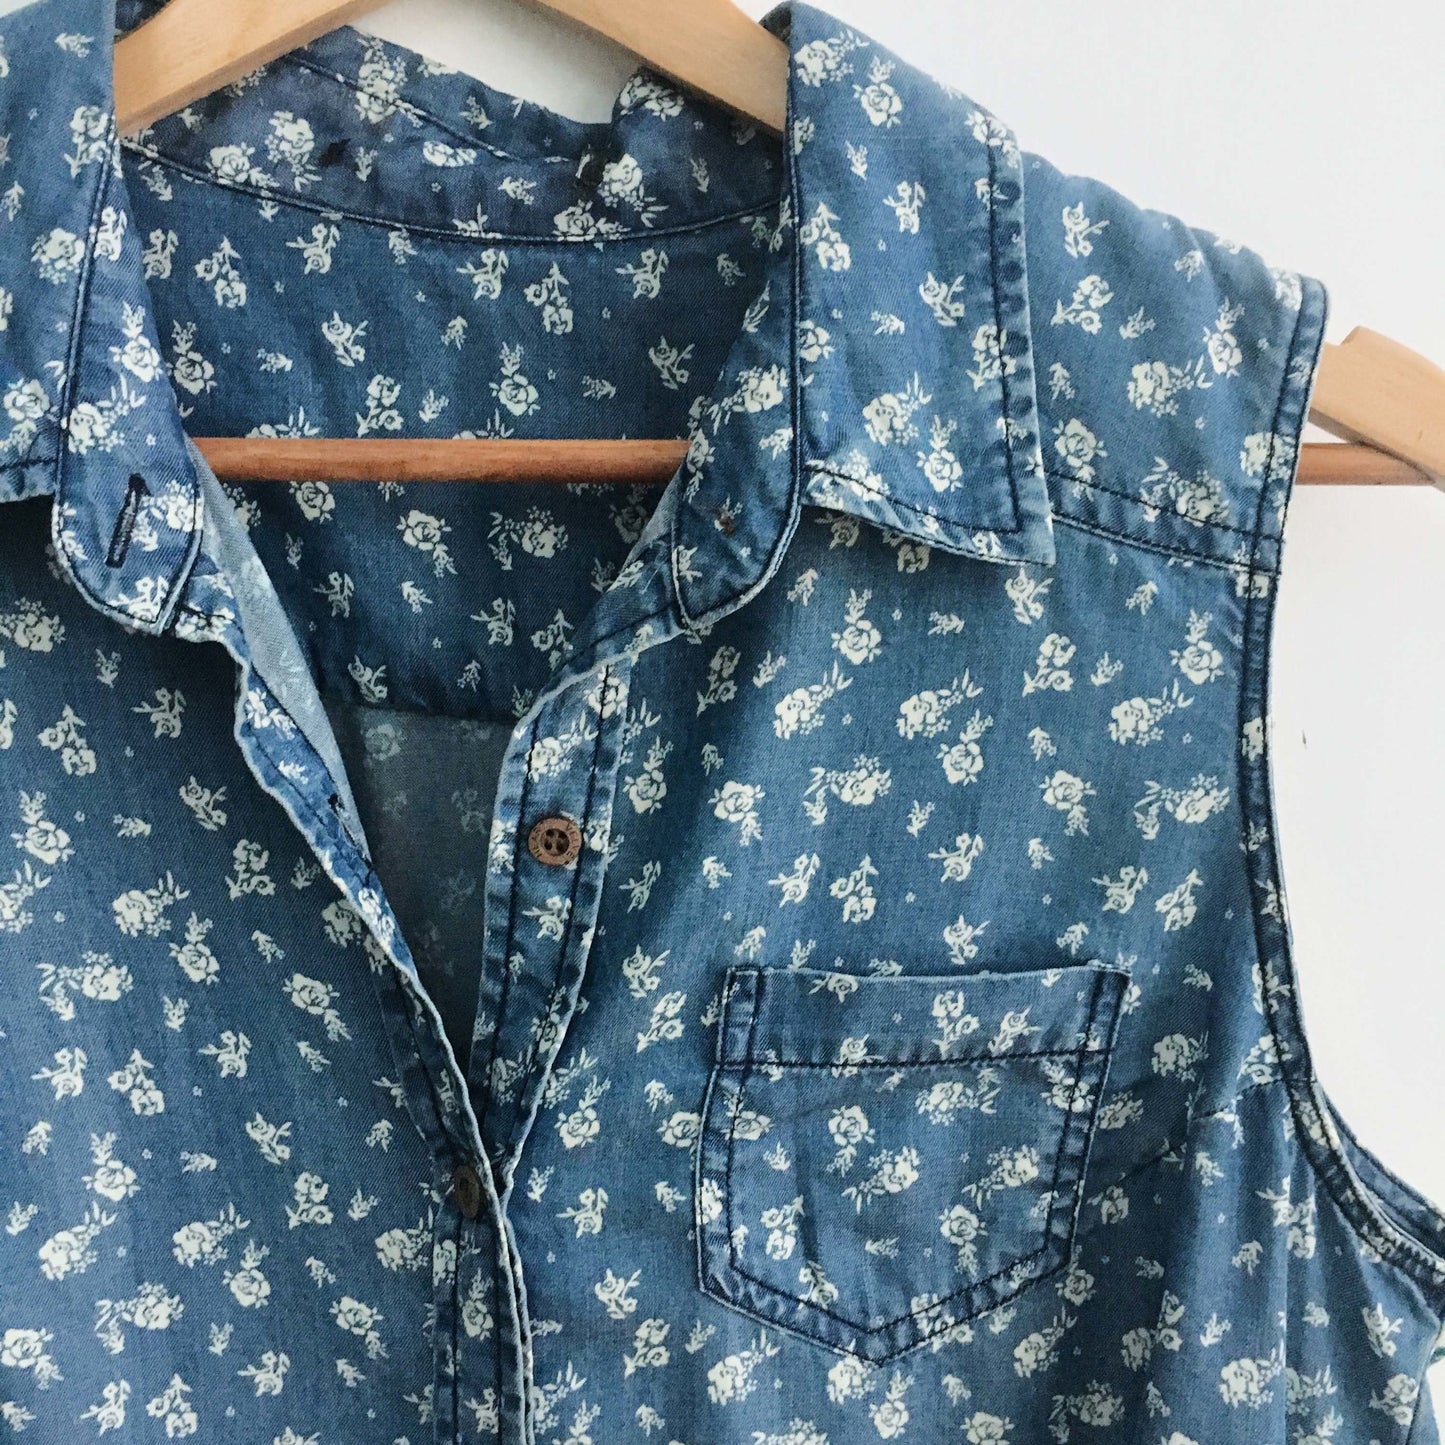 Velvet Heart Chambray Shirt with Roses - size Large